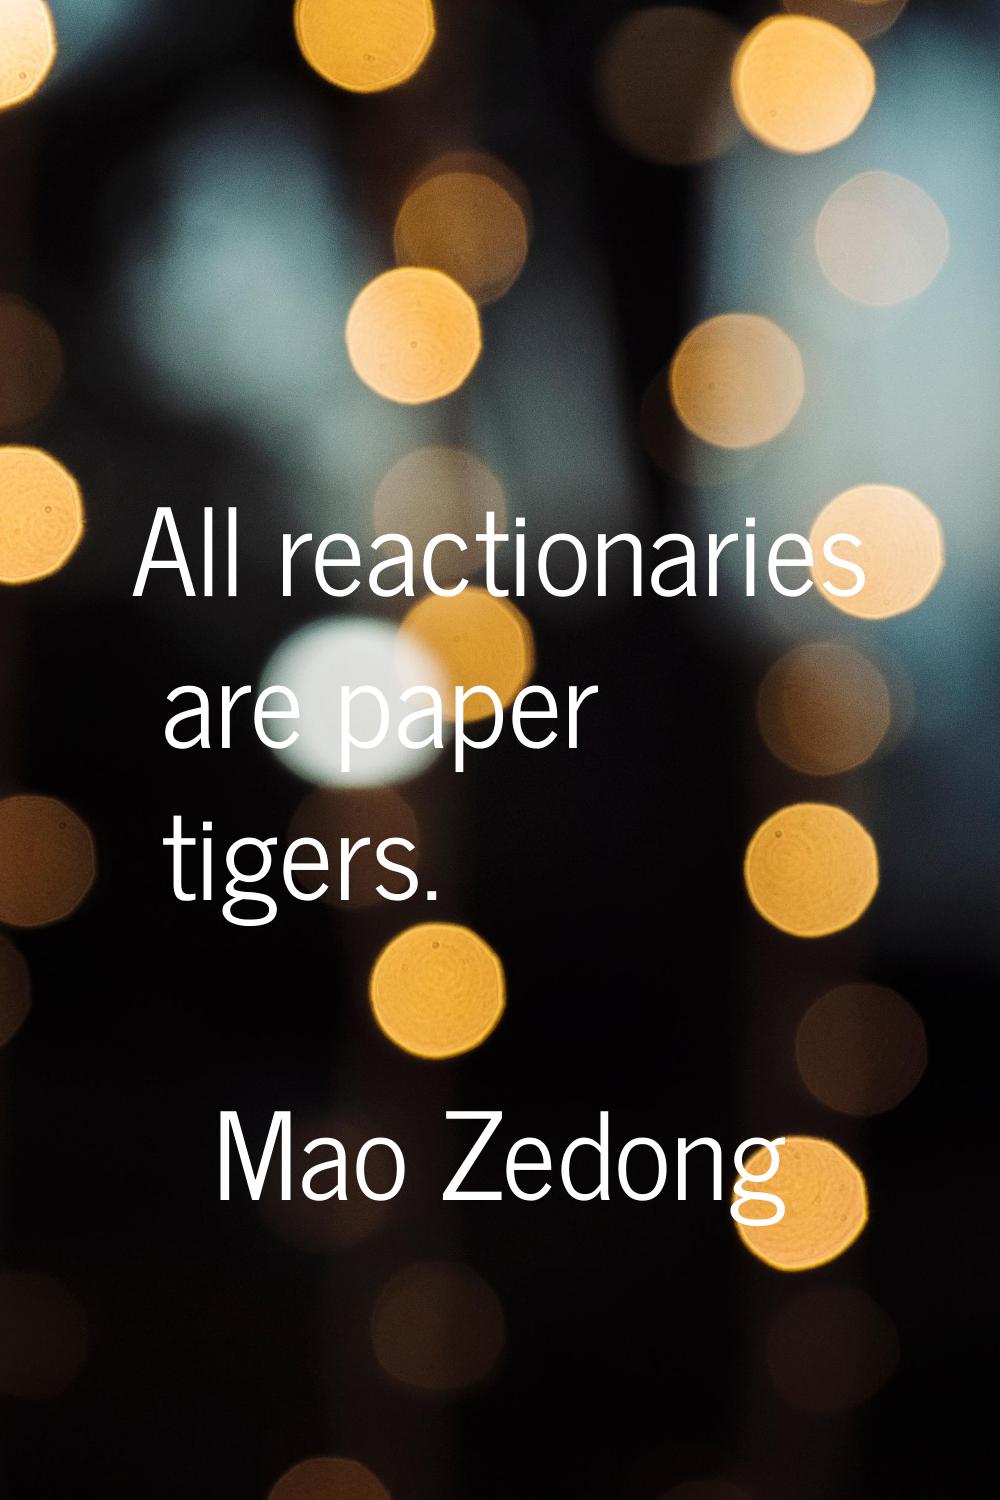 All reactionaries are paper tigers.